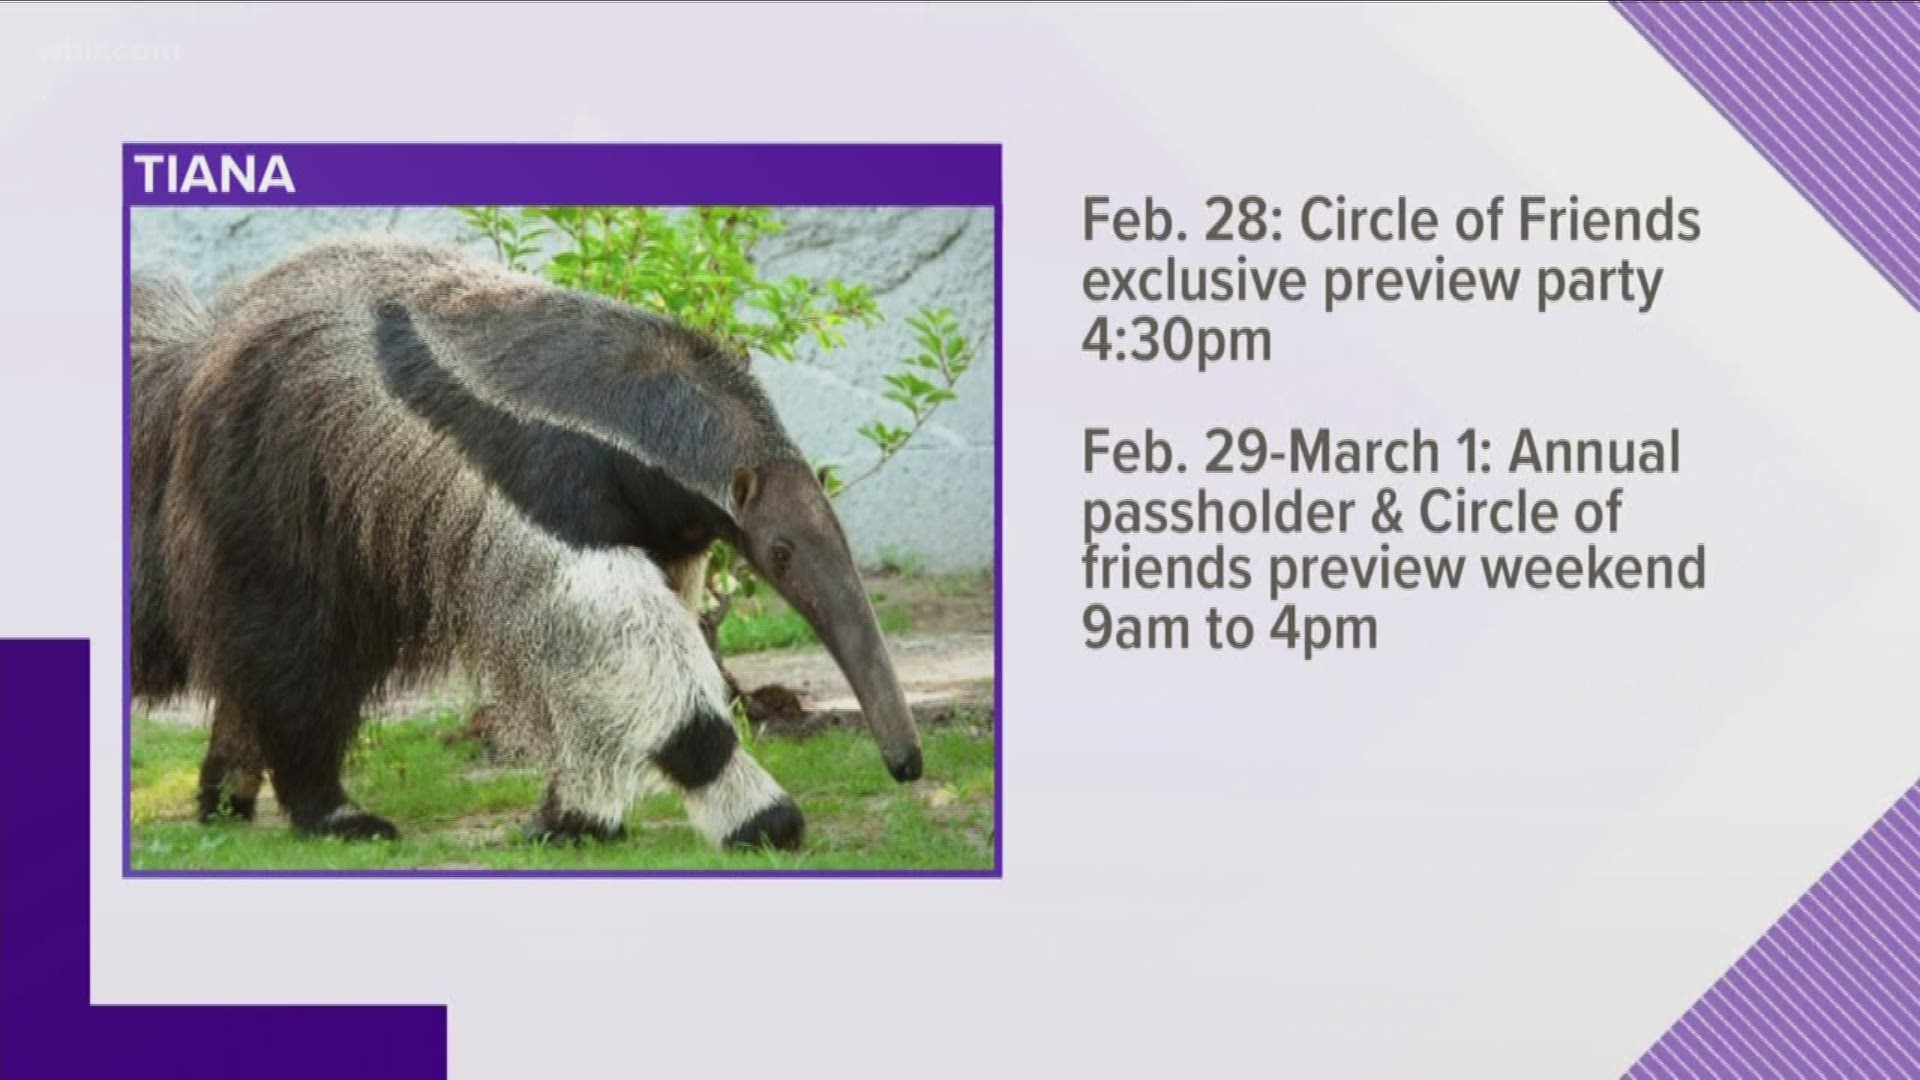 Tiana will be the 1st giant anteater at Zoo Knoxville and will make her public debut the first week of March.